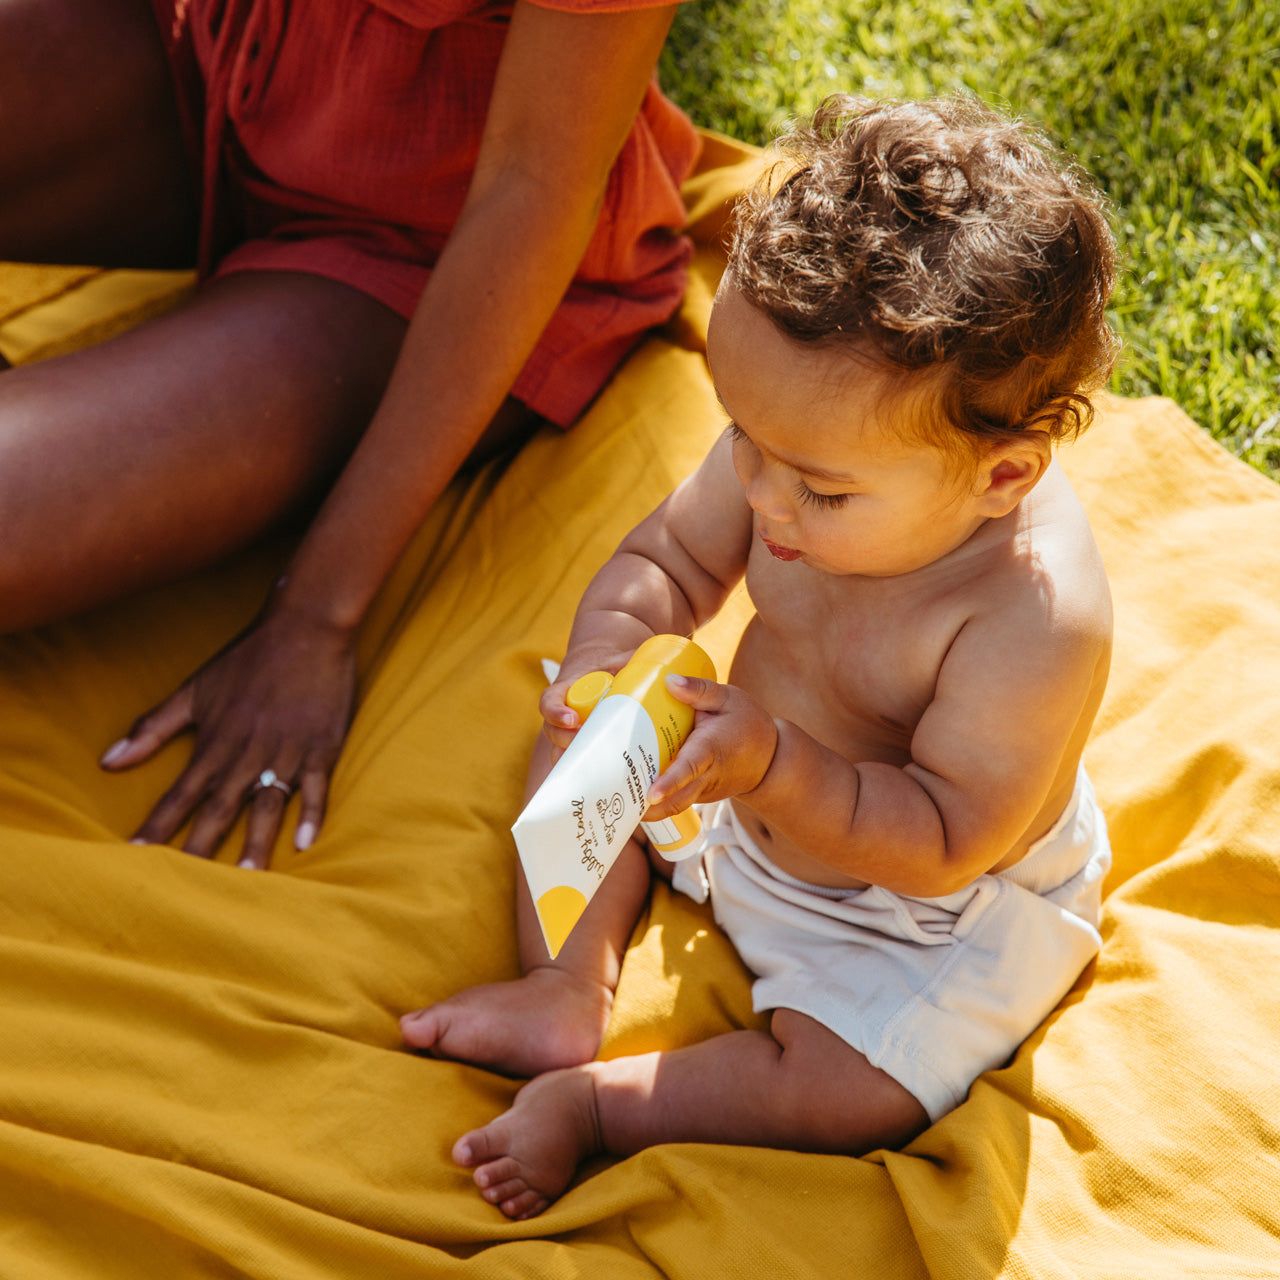 Baby holding Mineral Sunscreen on picnic blanket